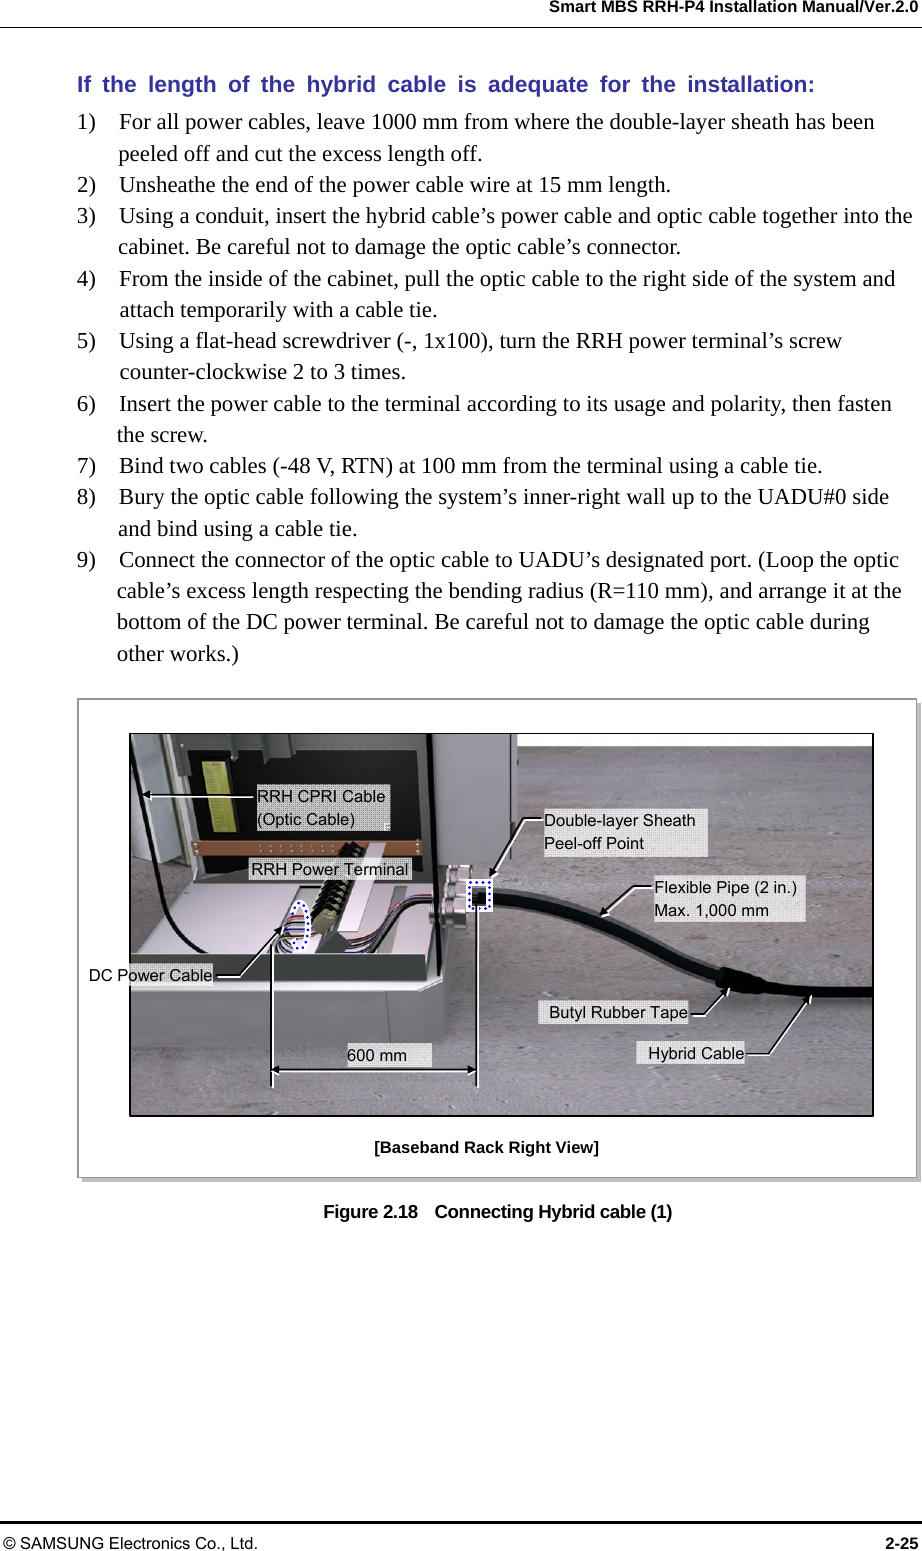  Smart MBS RRH-P4 Installation Manual/Ver.2.0 © SAMSUNG Electronics Co., Ltd.  2-25 If the length of the hybrid cable is adequate for the installation: 1)    For all power cables, leave 1000 mm from where the double-layer sheath has been peeled off and cut the excess length off. 2)    Unsheathe the end of the power cable wire at 15 mm length. 3)    Using a conduit, insert the hybrid cable’s power cable and optic cable together into the cabinet. Be careful not to damage the optic cable’s connector. 4)    From the inside of the cabinet, pull the optic cable to the right side of the system and attach temporarily with a cable tie. 5)    Using a flat-head screwdriver (-, 1x100), turn the RRH power terminal’s screw counter-clockwise 2 to 3 times. 6)    Insert the power cable to the terminal according to its usage and polarity, then fasten the screw. 7)    Bind two cables (-48 V, RTN) at 100 mm from the terminal using a cable tie. 8)    Bury the optic cable following the system’s inner-right wall up to the UADU#0 side and bind using a cable tie. 9)    Connect the connector of the optic cable to UADU’s designated port. (Loop the optic cable’s excess length respecting the bending radius (R=110 mm), and arrange it at the bottom of the DC power terminal. Be careful not to damage the optic cable during other works.)  Figure 2.18    Connecting Hybrid cable (1)  [Baseband Rack Right View] RRH Power TerminalDouble-layer Sheath Peel-off Point 600 mm RRH CPRI Cable(Optic Cable) Flexible Pipe (2 in.) Max. 1,000 mm Butyl Rubber TapeHybrid CableDC Power Cable